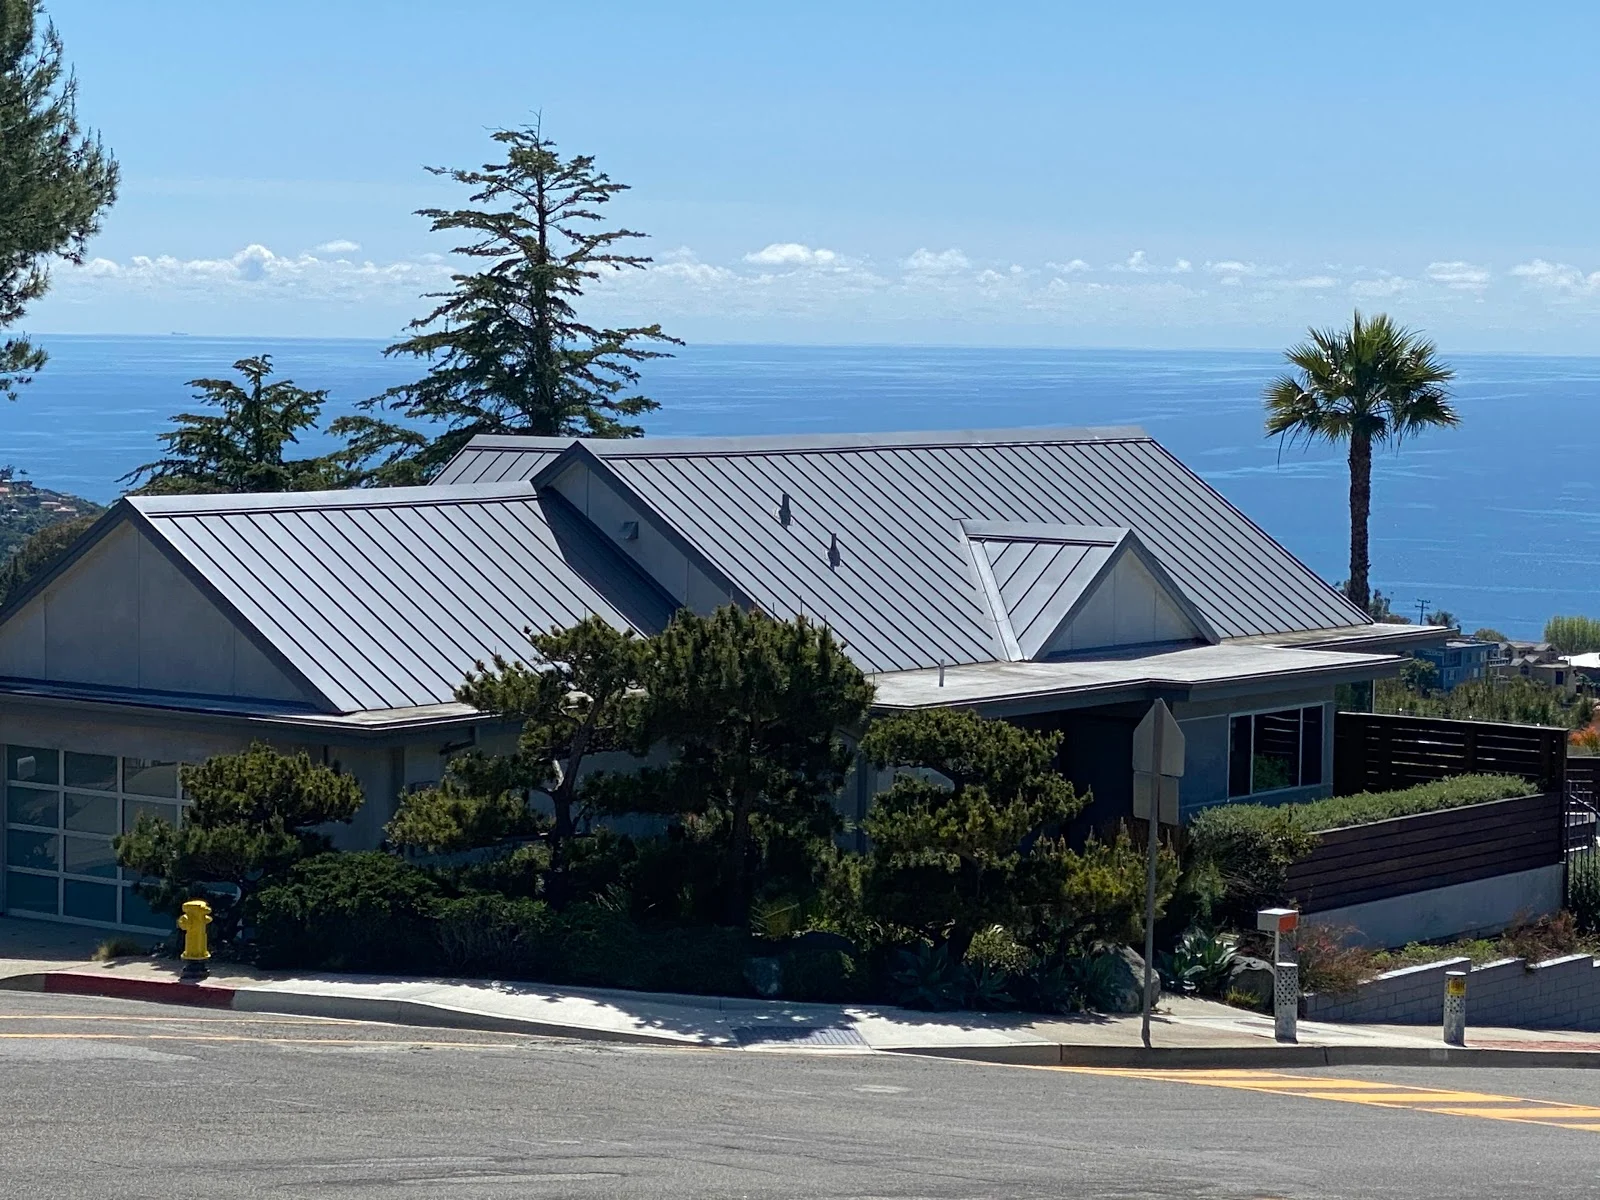 Metal Roofing In Coastal Areas Best Materials To Use Near The Ocean